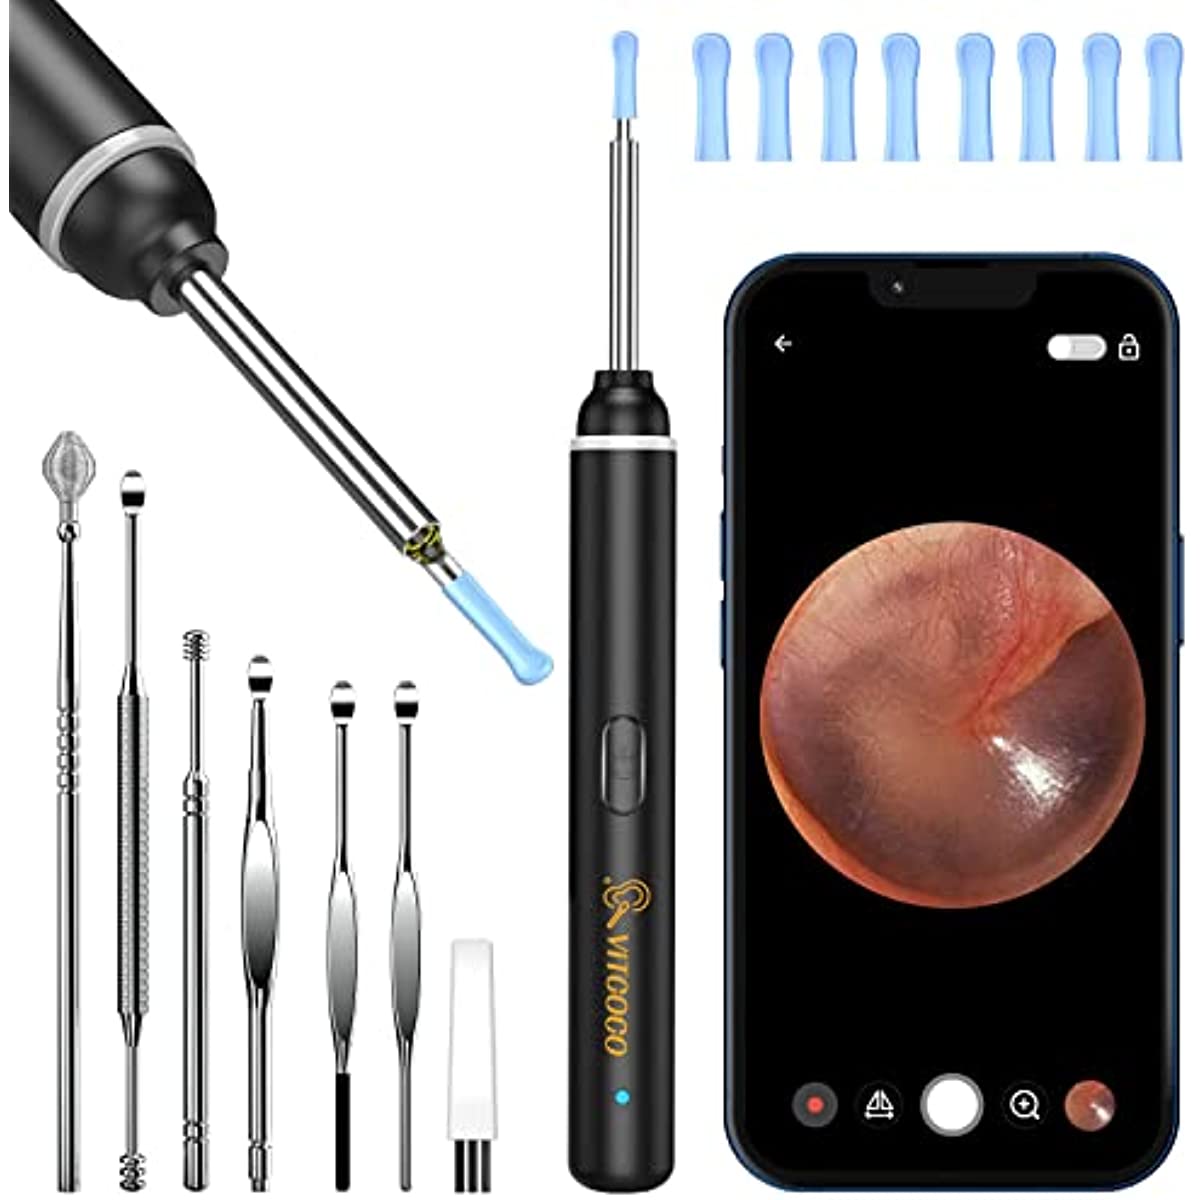 Ear Wax Removal Tool, 1920P HD Ear Cleaner with 6 LED Lights, 3mm Mini Visual Ear Camera for iPhone, iPad, Android - onestopmegamall23